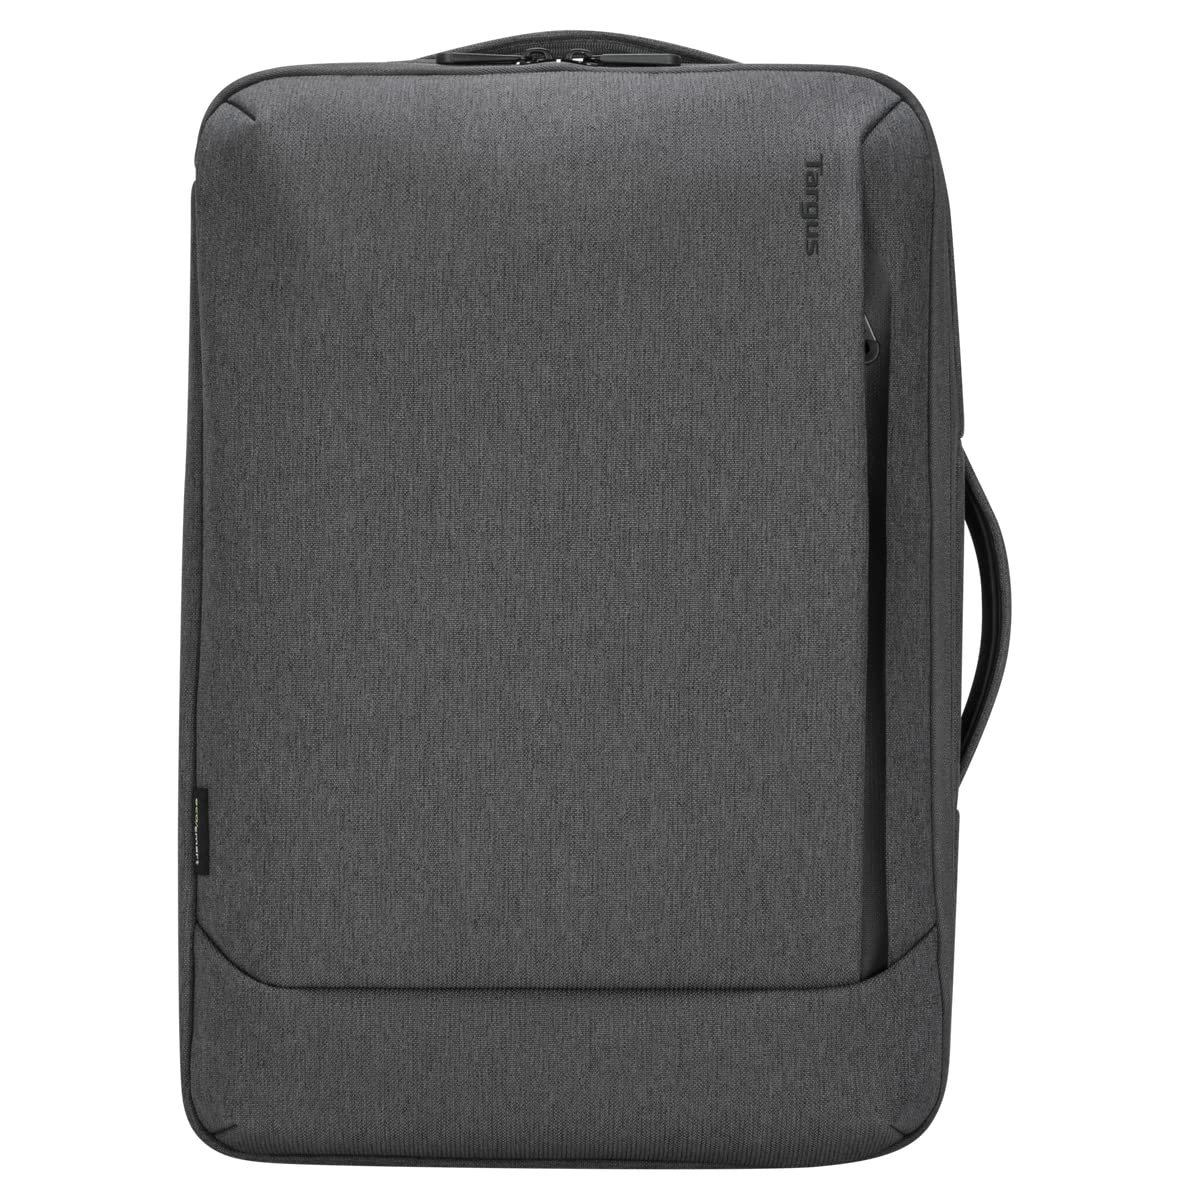 Targus Cypress Convertible Backpack with EcoSmart Designed for Business Traveler and School fit up to 15.6-Inch Laptop/Notebook, Gray (TBB58702GL)